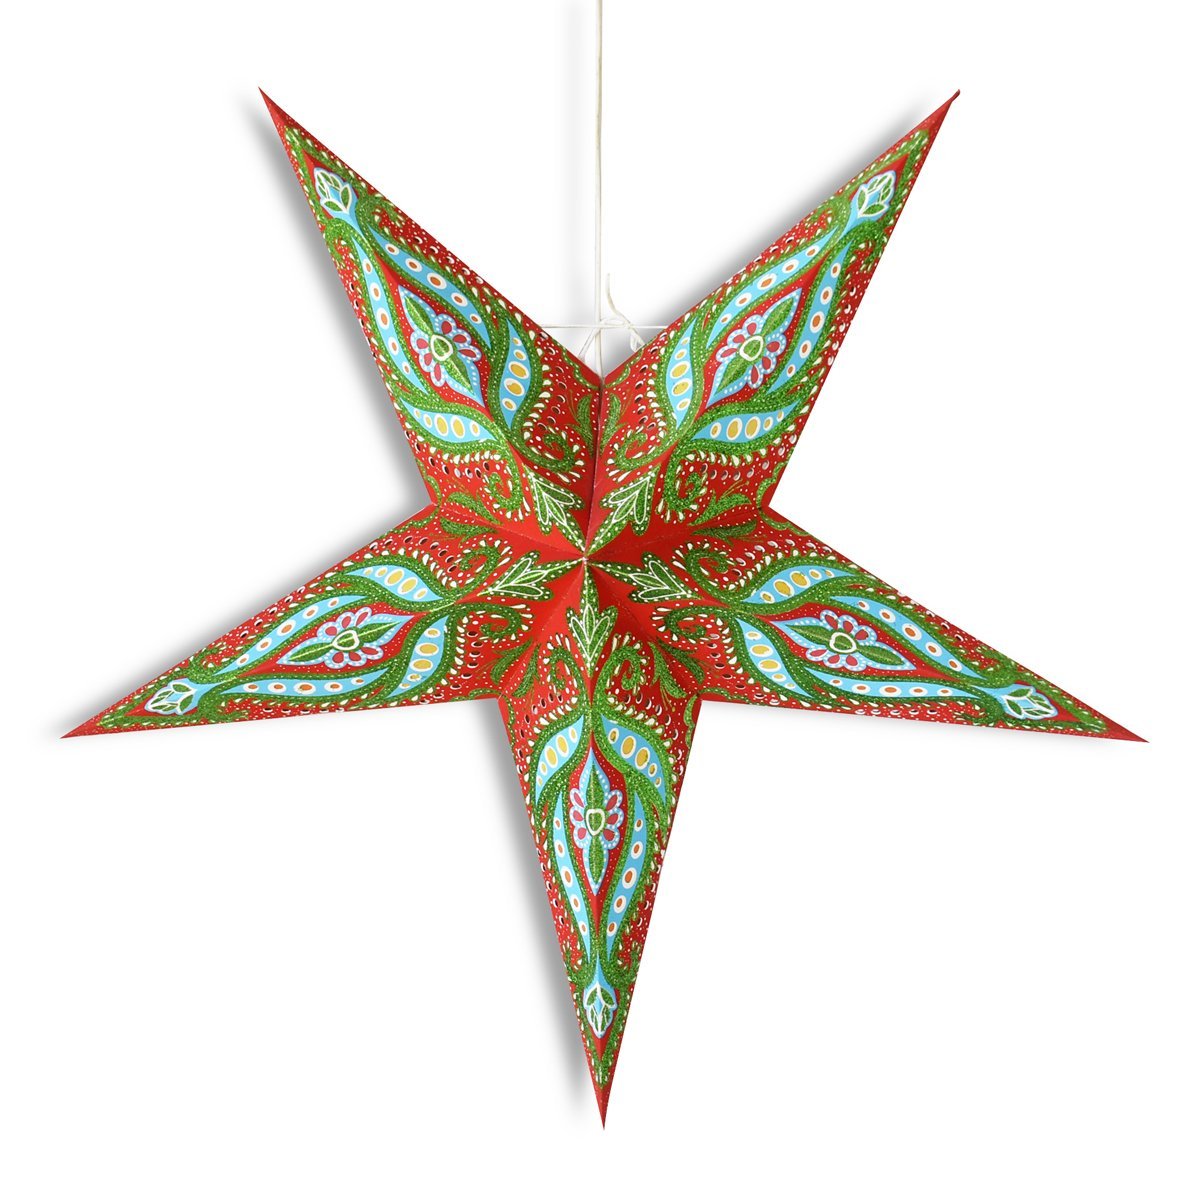 3-PACK + Cord | 24&quot; Red / Green Bloom Glitter Paper Star Lantern and Lamp Cord Hanging Decoration - PaperLanternStore.com - Paper Lanterns, Decor, Party Lights &amp; More